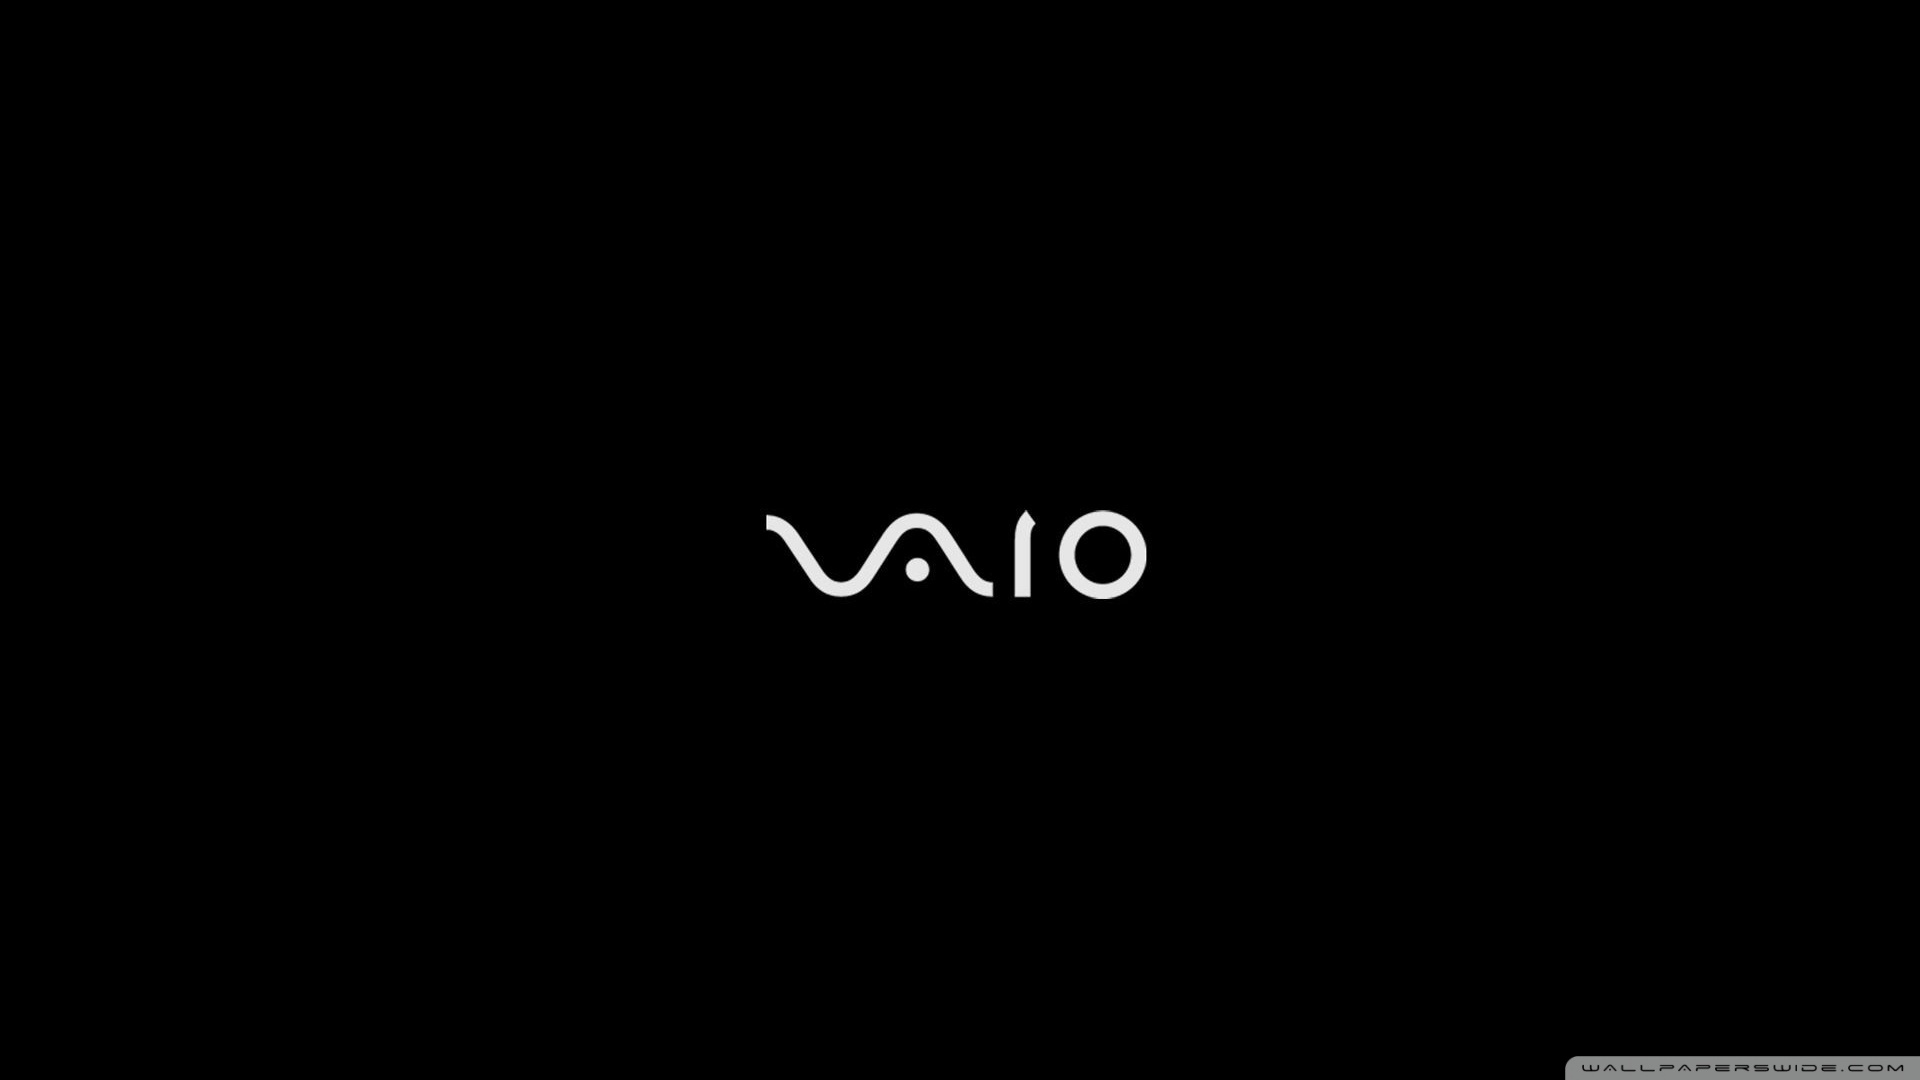 Free Download Sony Vaio Wallpaper 19x1080 Sony Vaio 19x1080 For Your Desktop Mobile Tablet Explore 76 Sony Vaio Wallpaper Sony Wallpaper Xperia Wallpaper